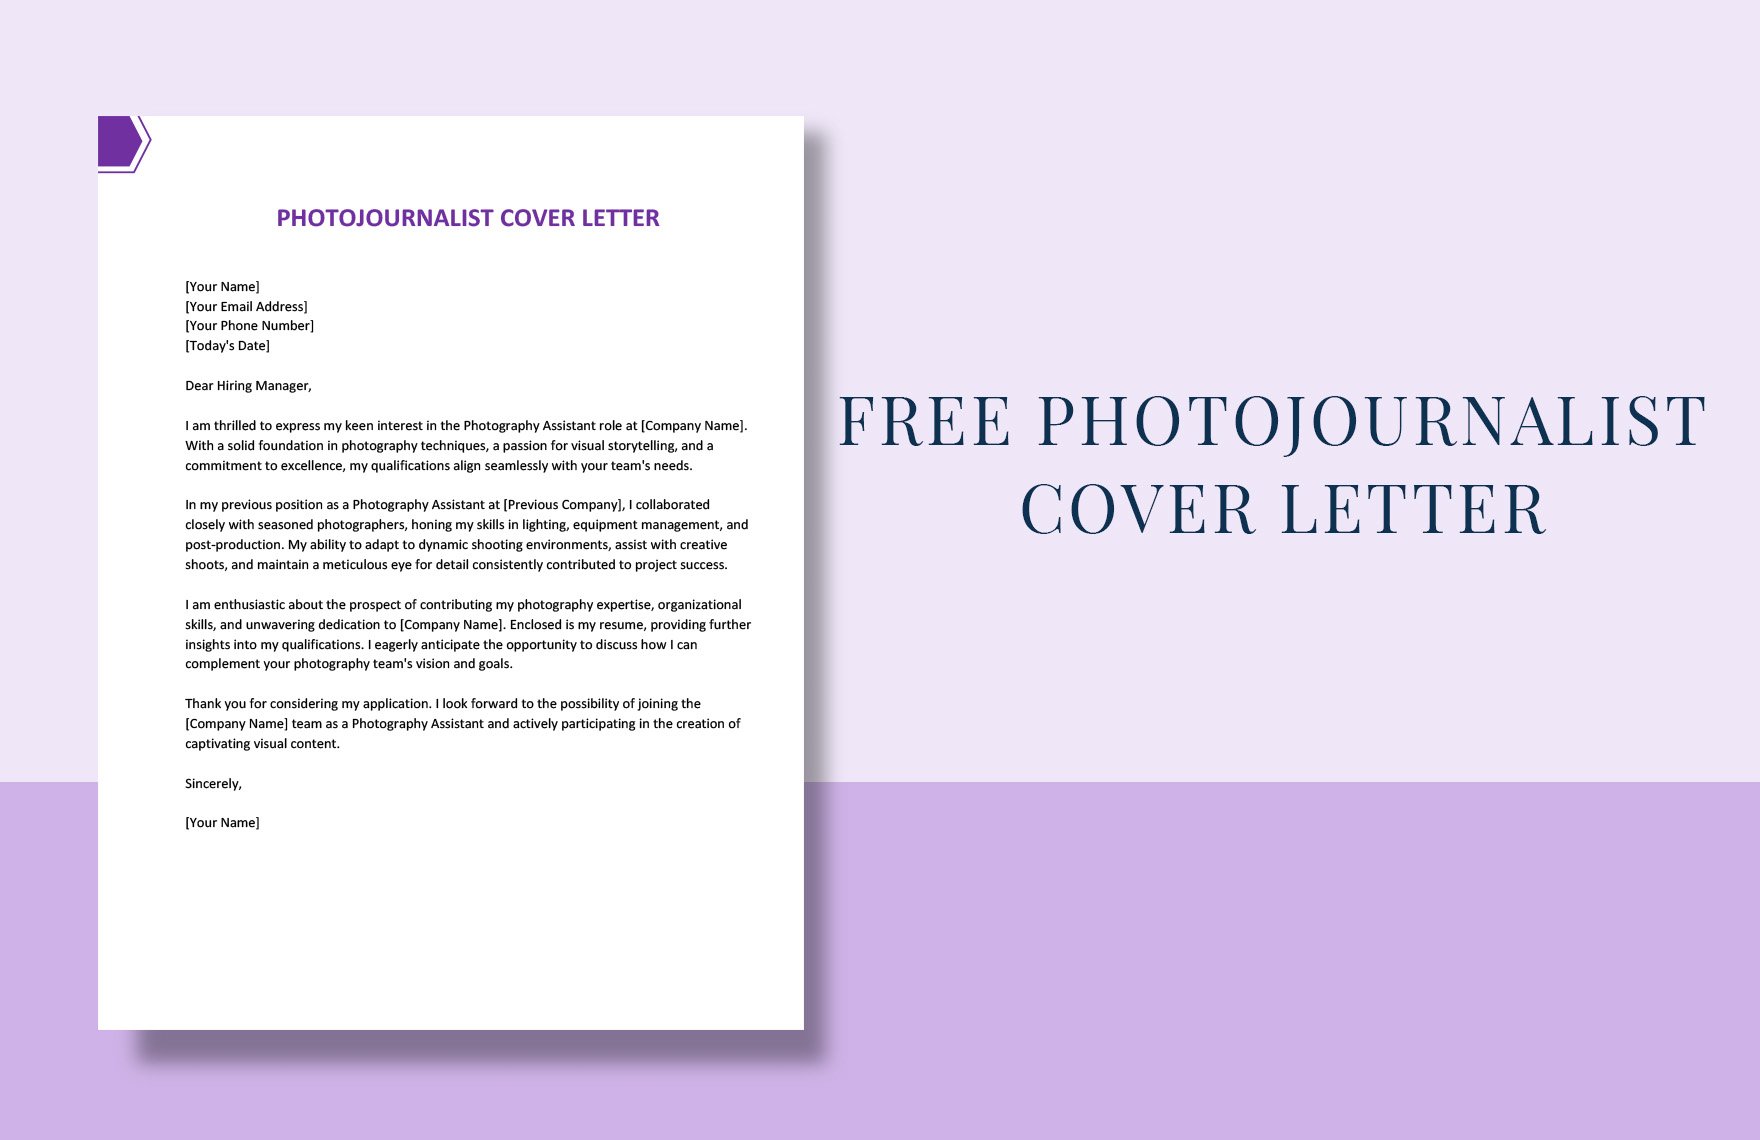 Photojournalist Cover Letter